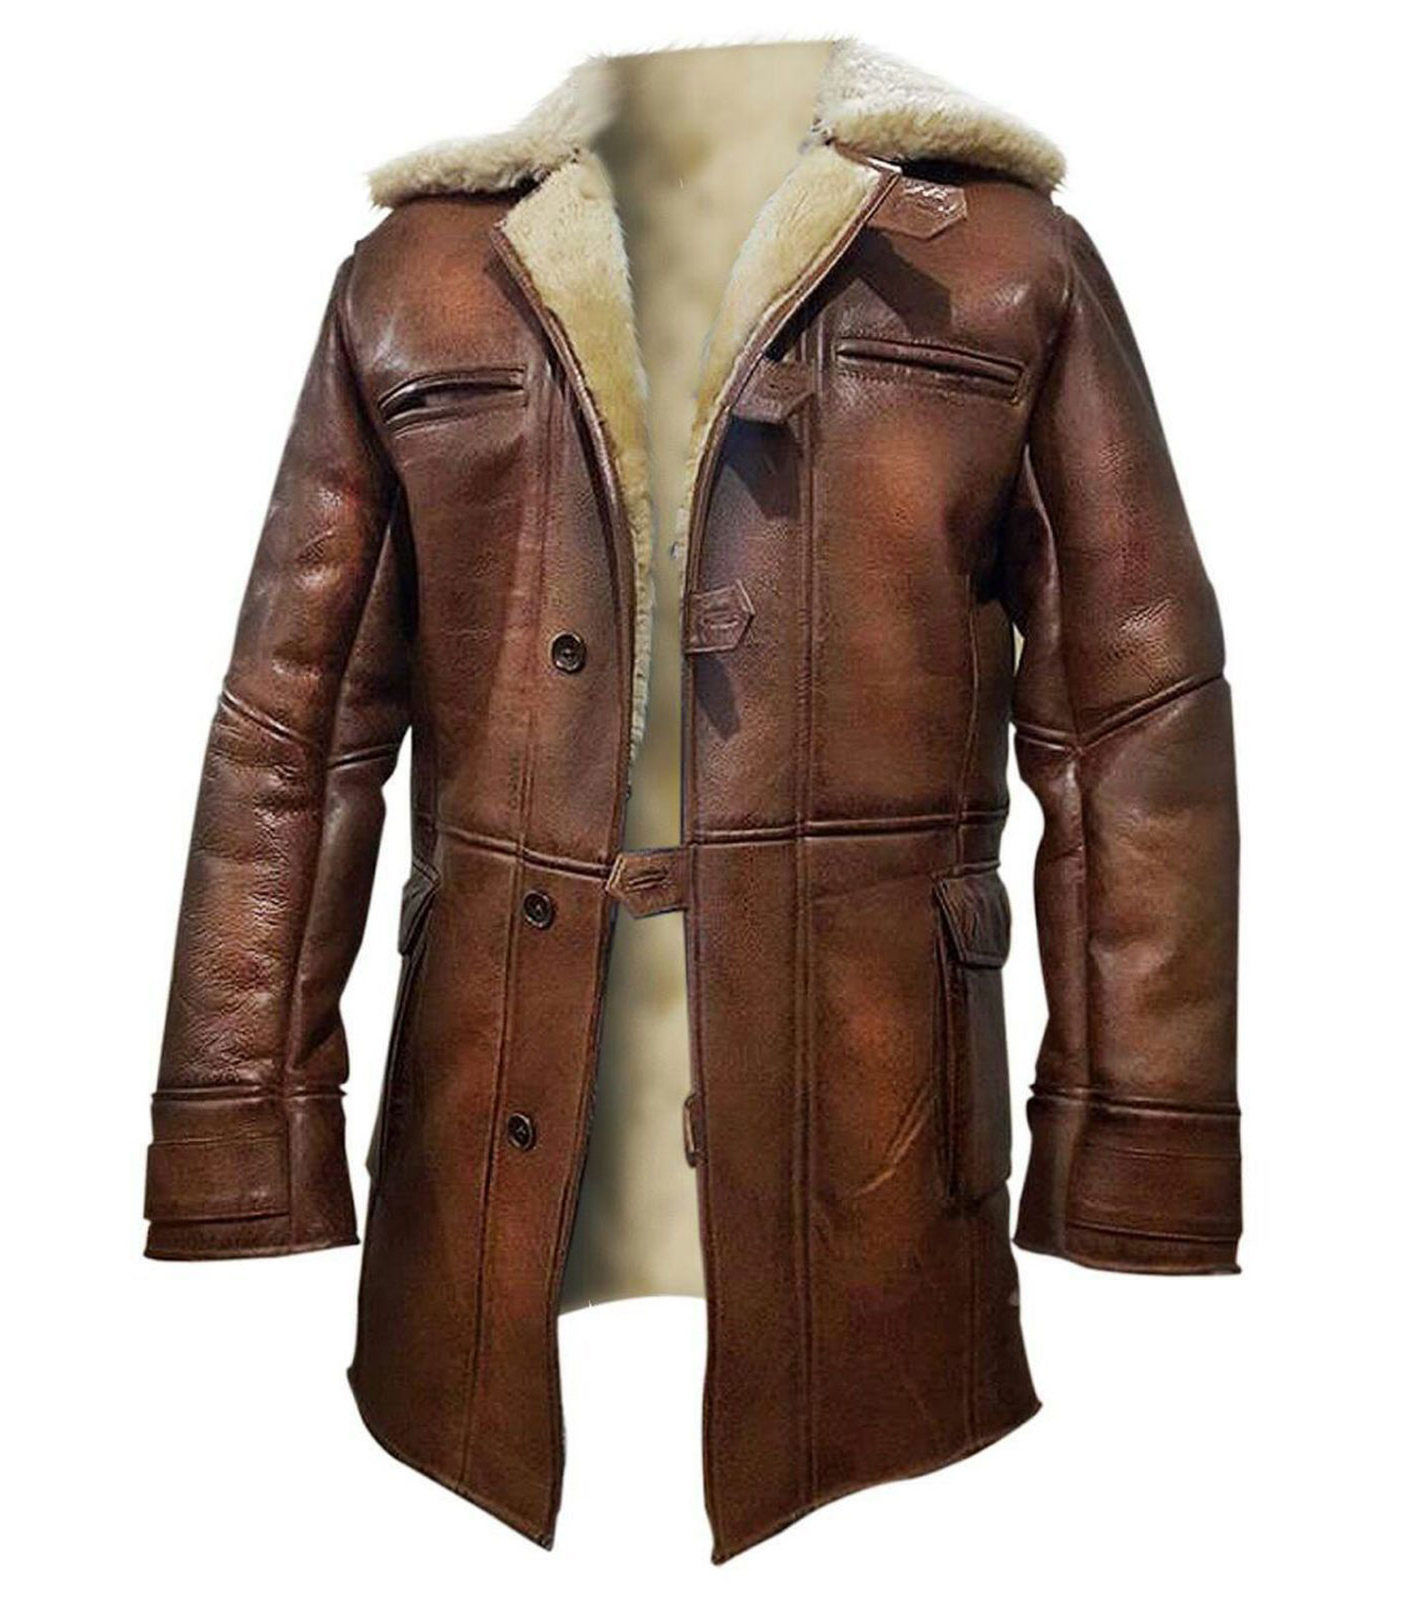 Dark Knight Rises Bane Genuine Leather Shearling Brown Ginger Trench Coat/Jacket